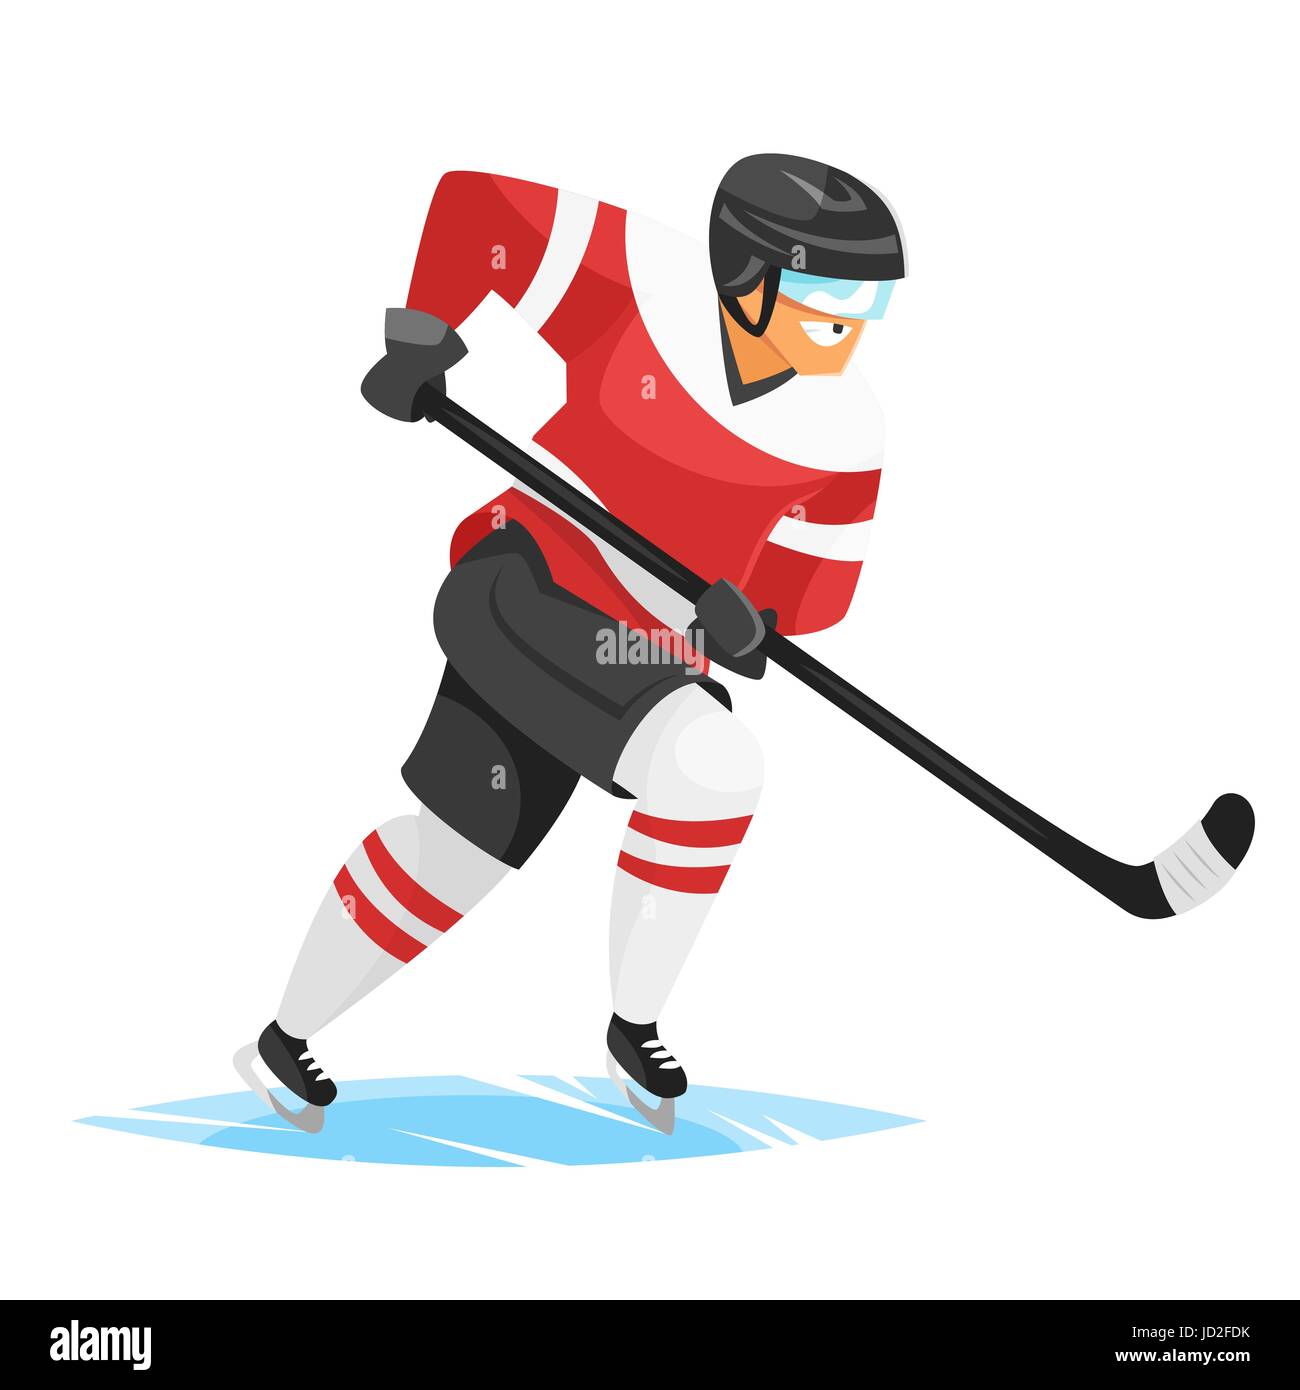 Pin on Hockey by Design Blog Articles 2017